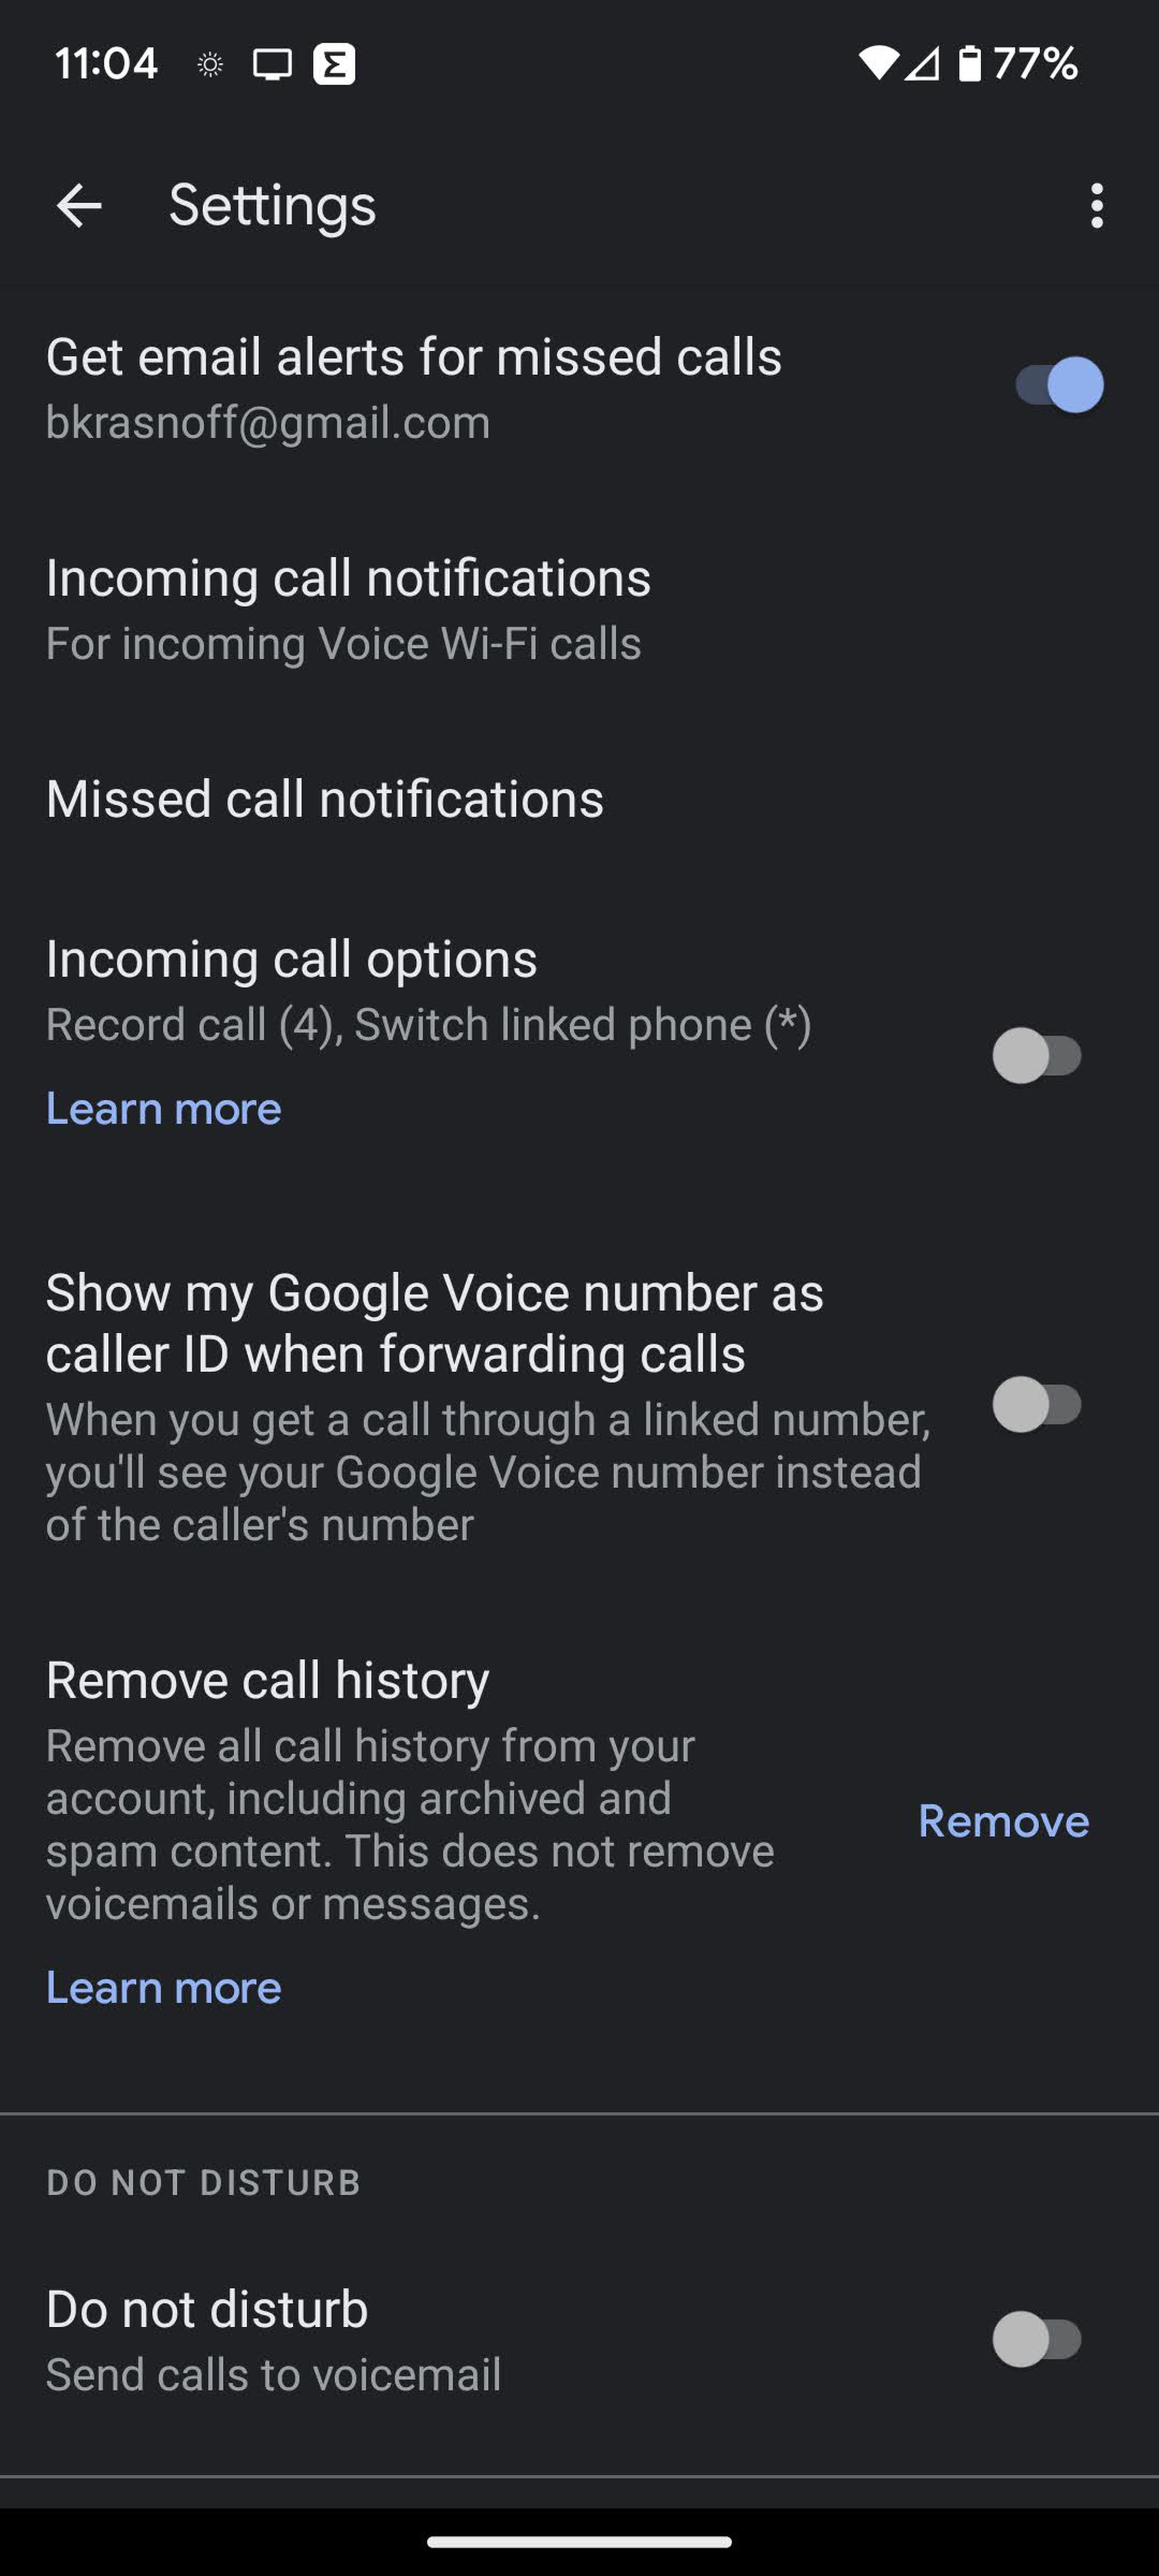 The settings menu for Google Voice shows a toggle 